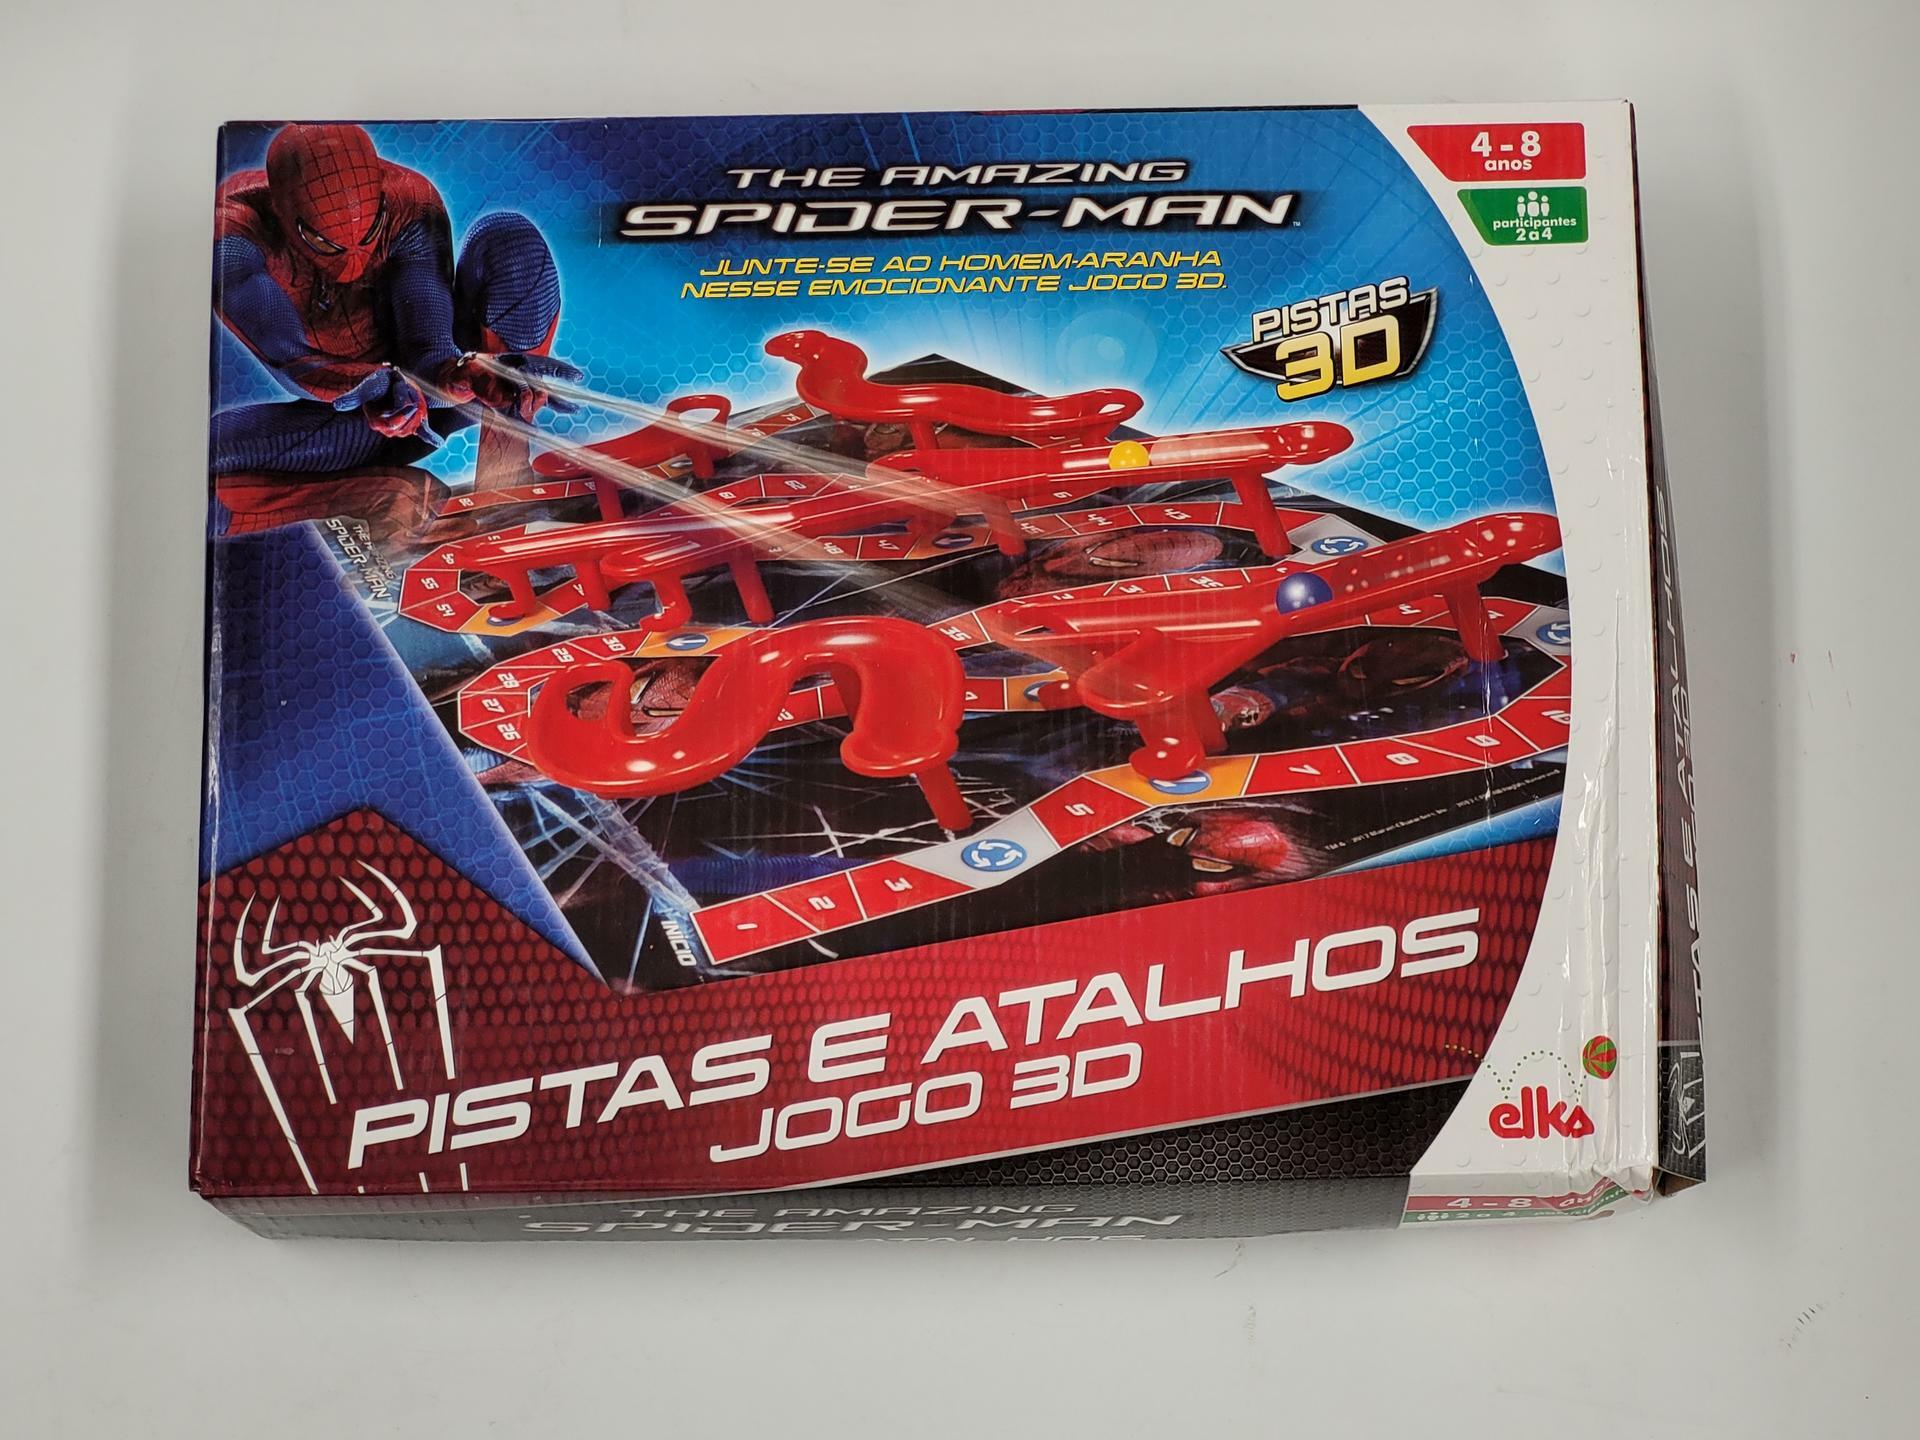 Amazing Spider-Man Exciting 3D Board Game with Marbles And Lanes